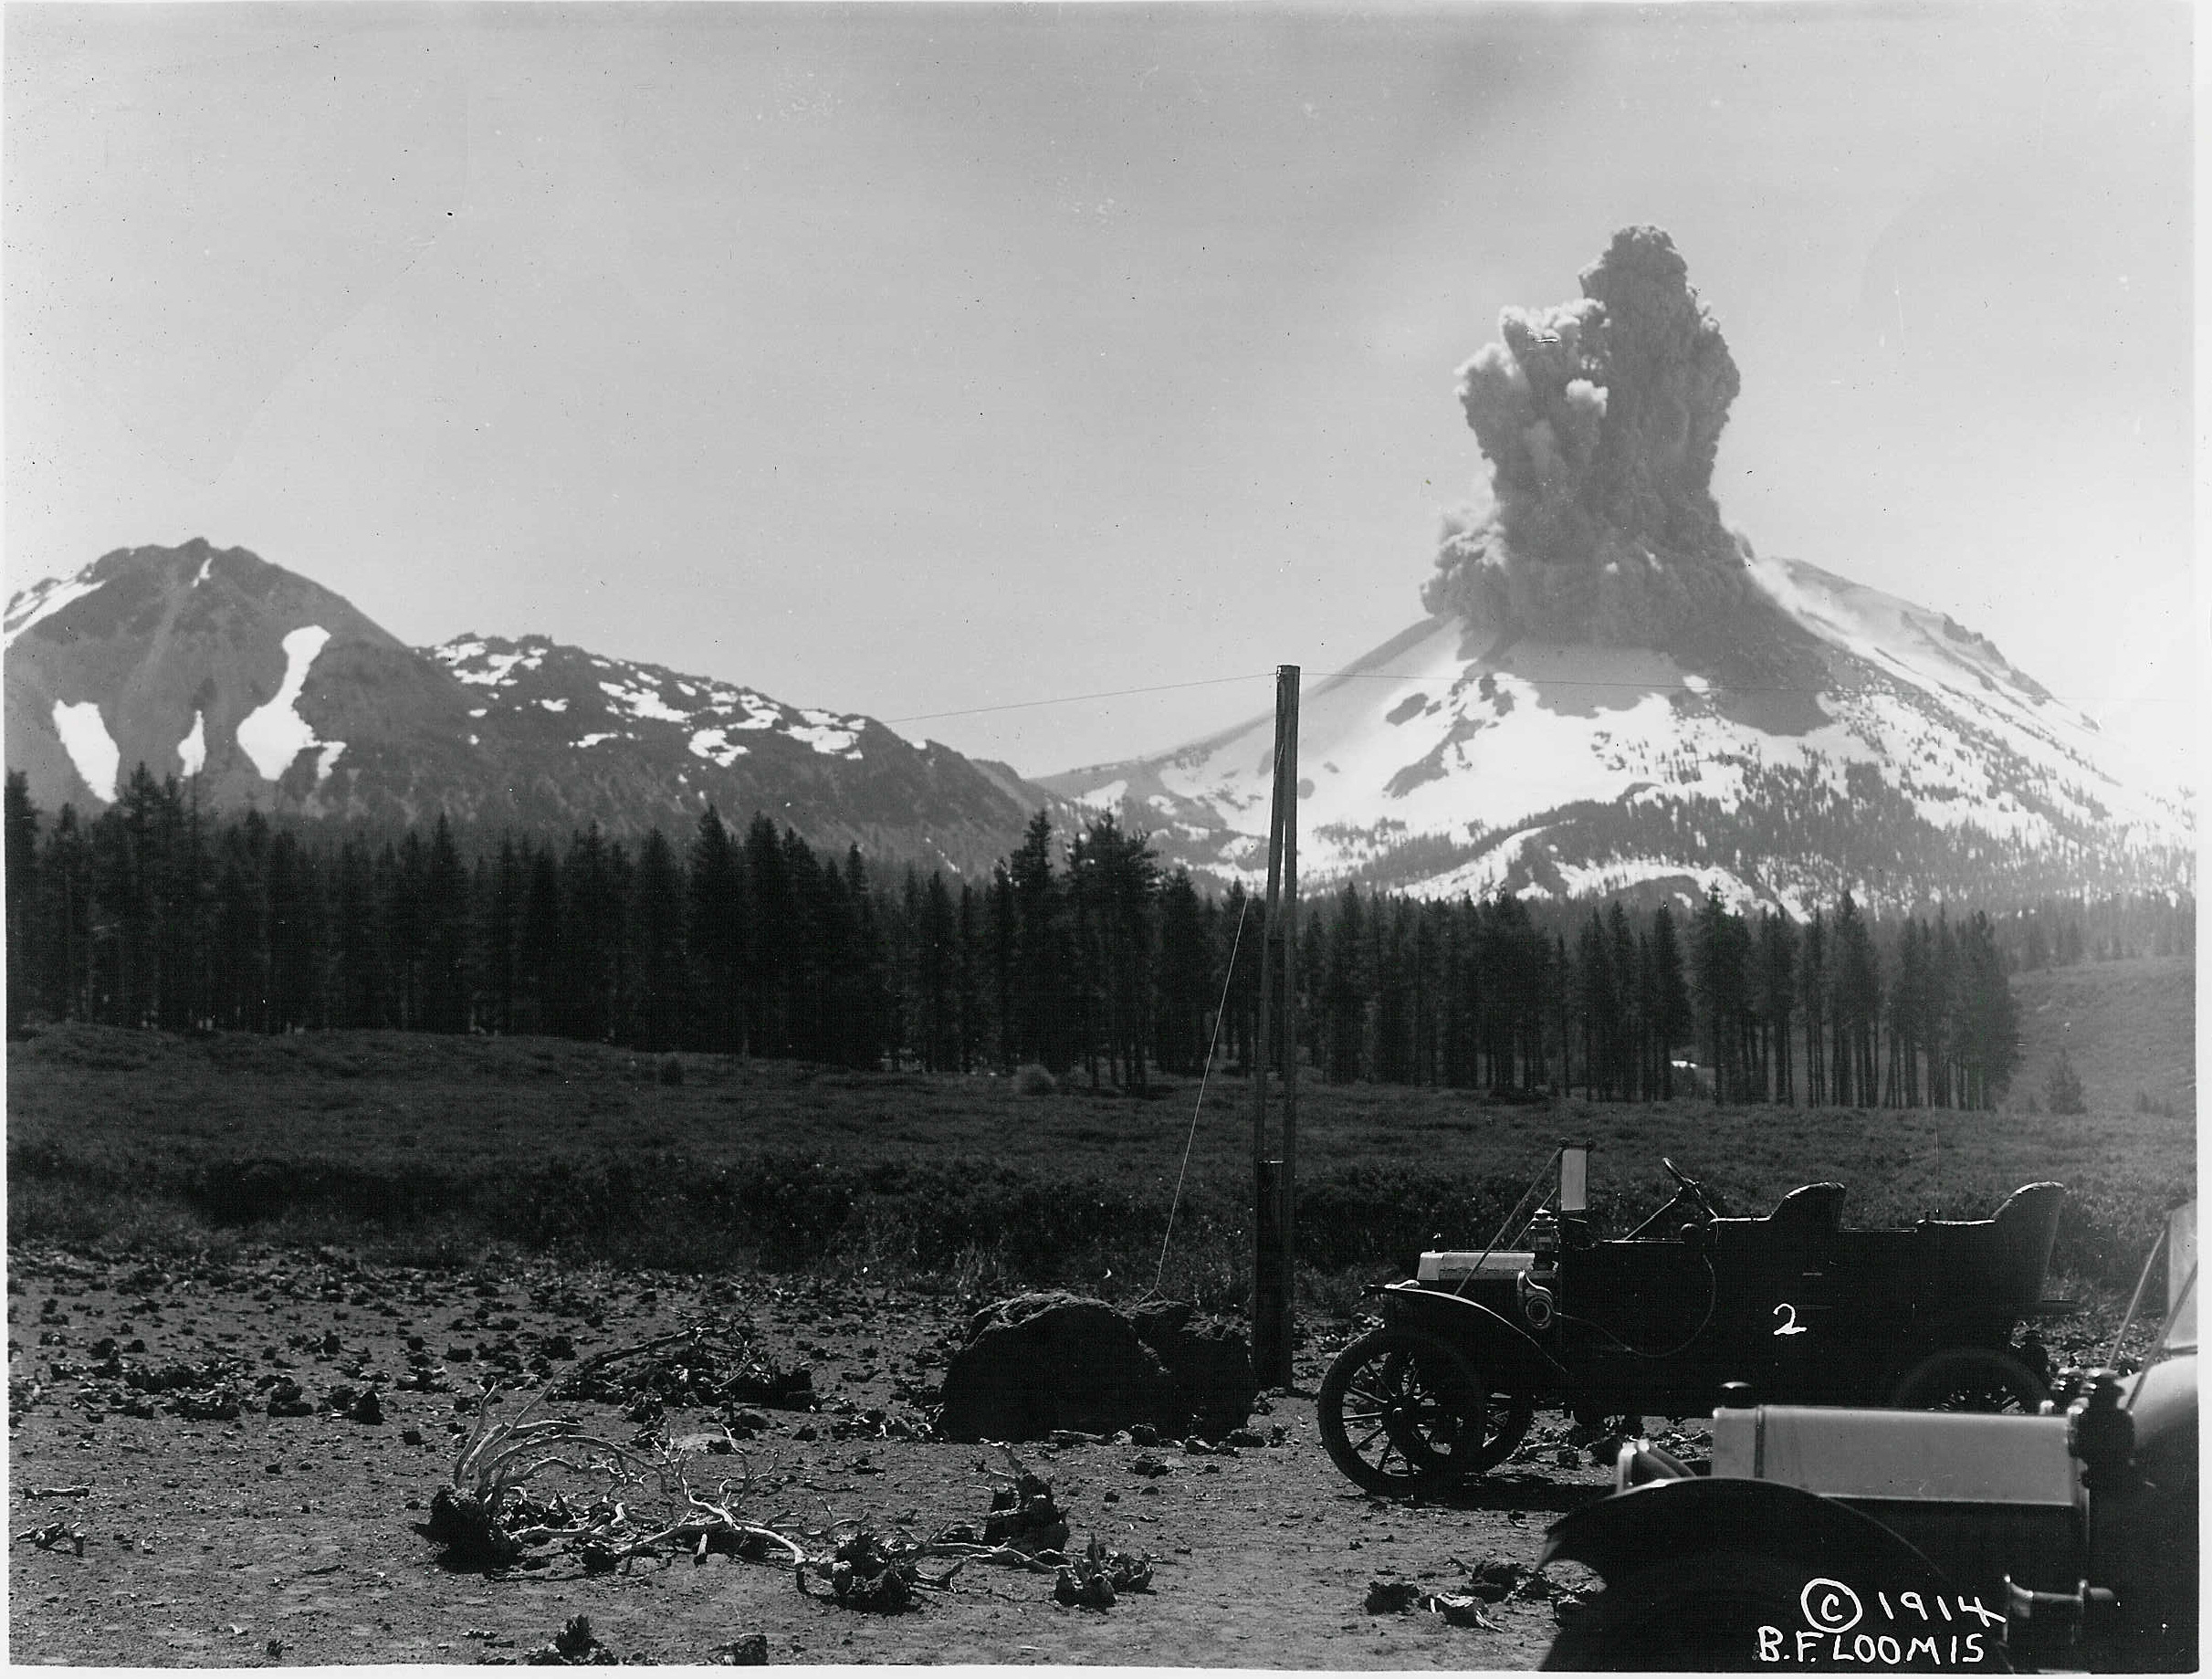 An ash cloud rises above a volcano with an early 19th century vehicle at the forefront.